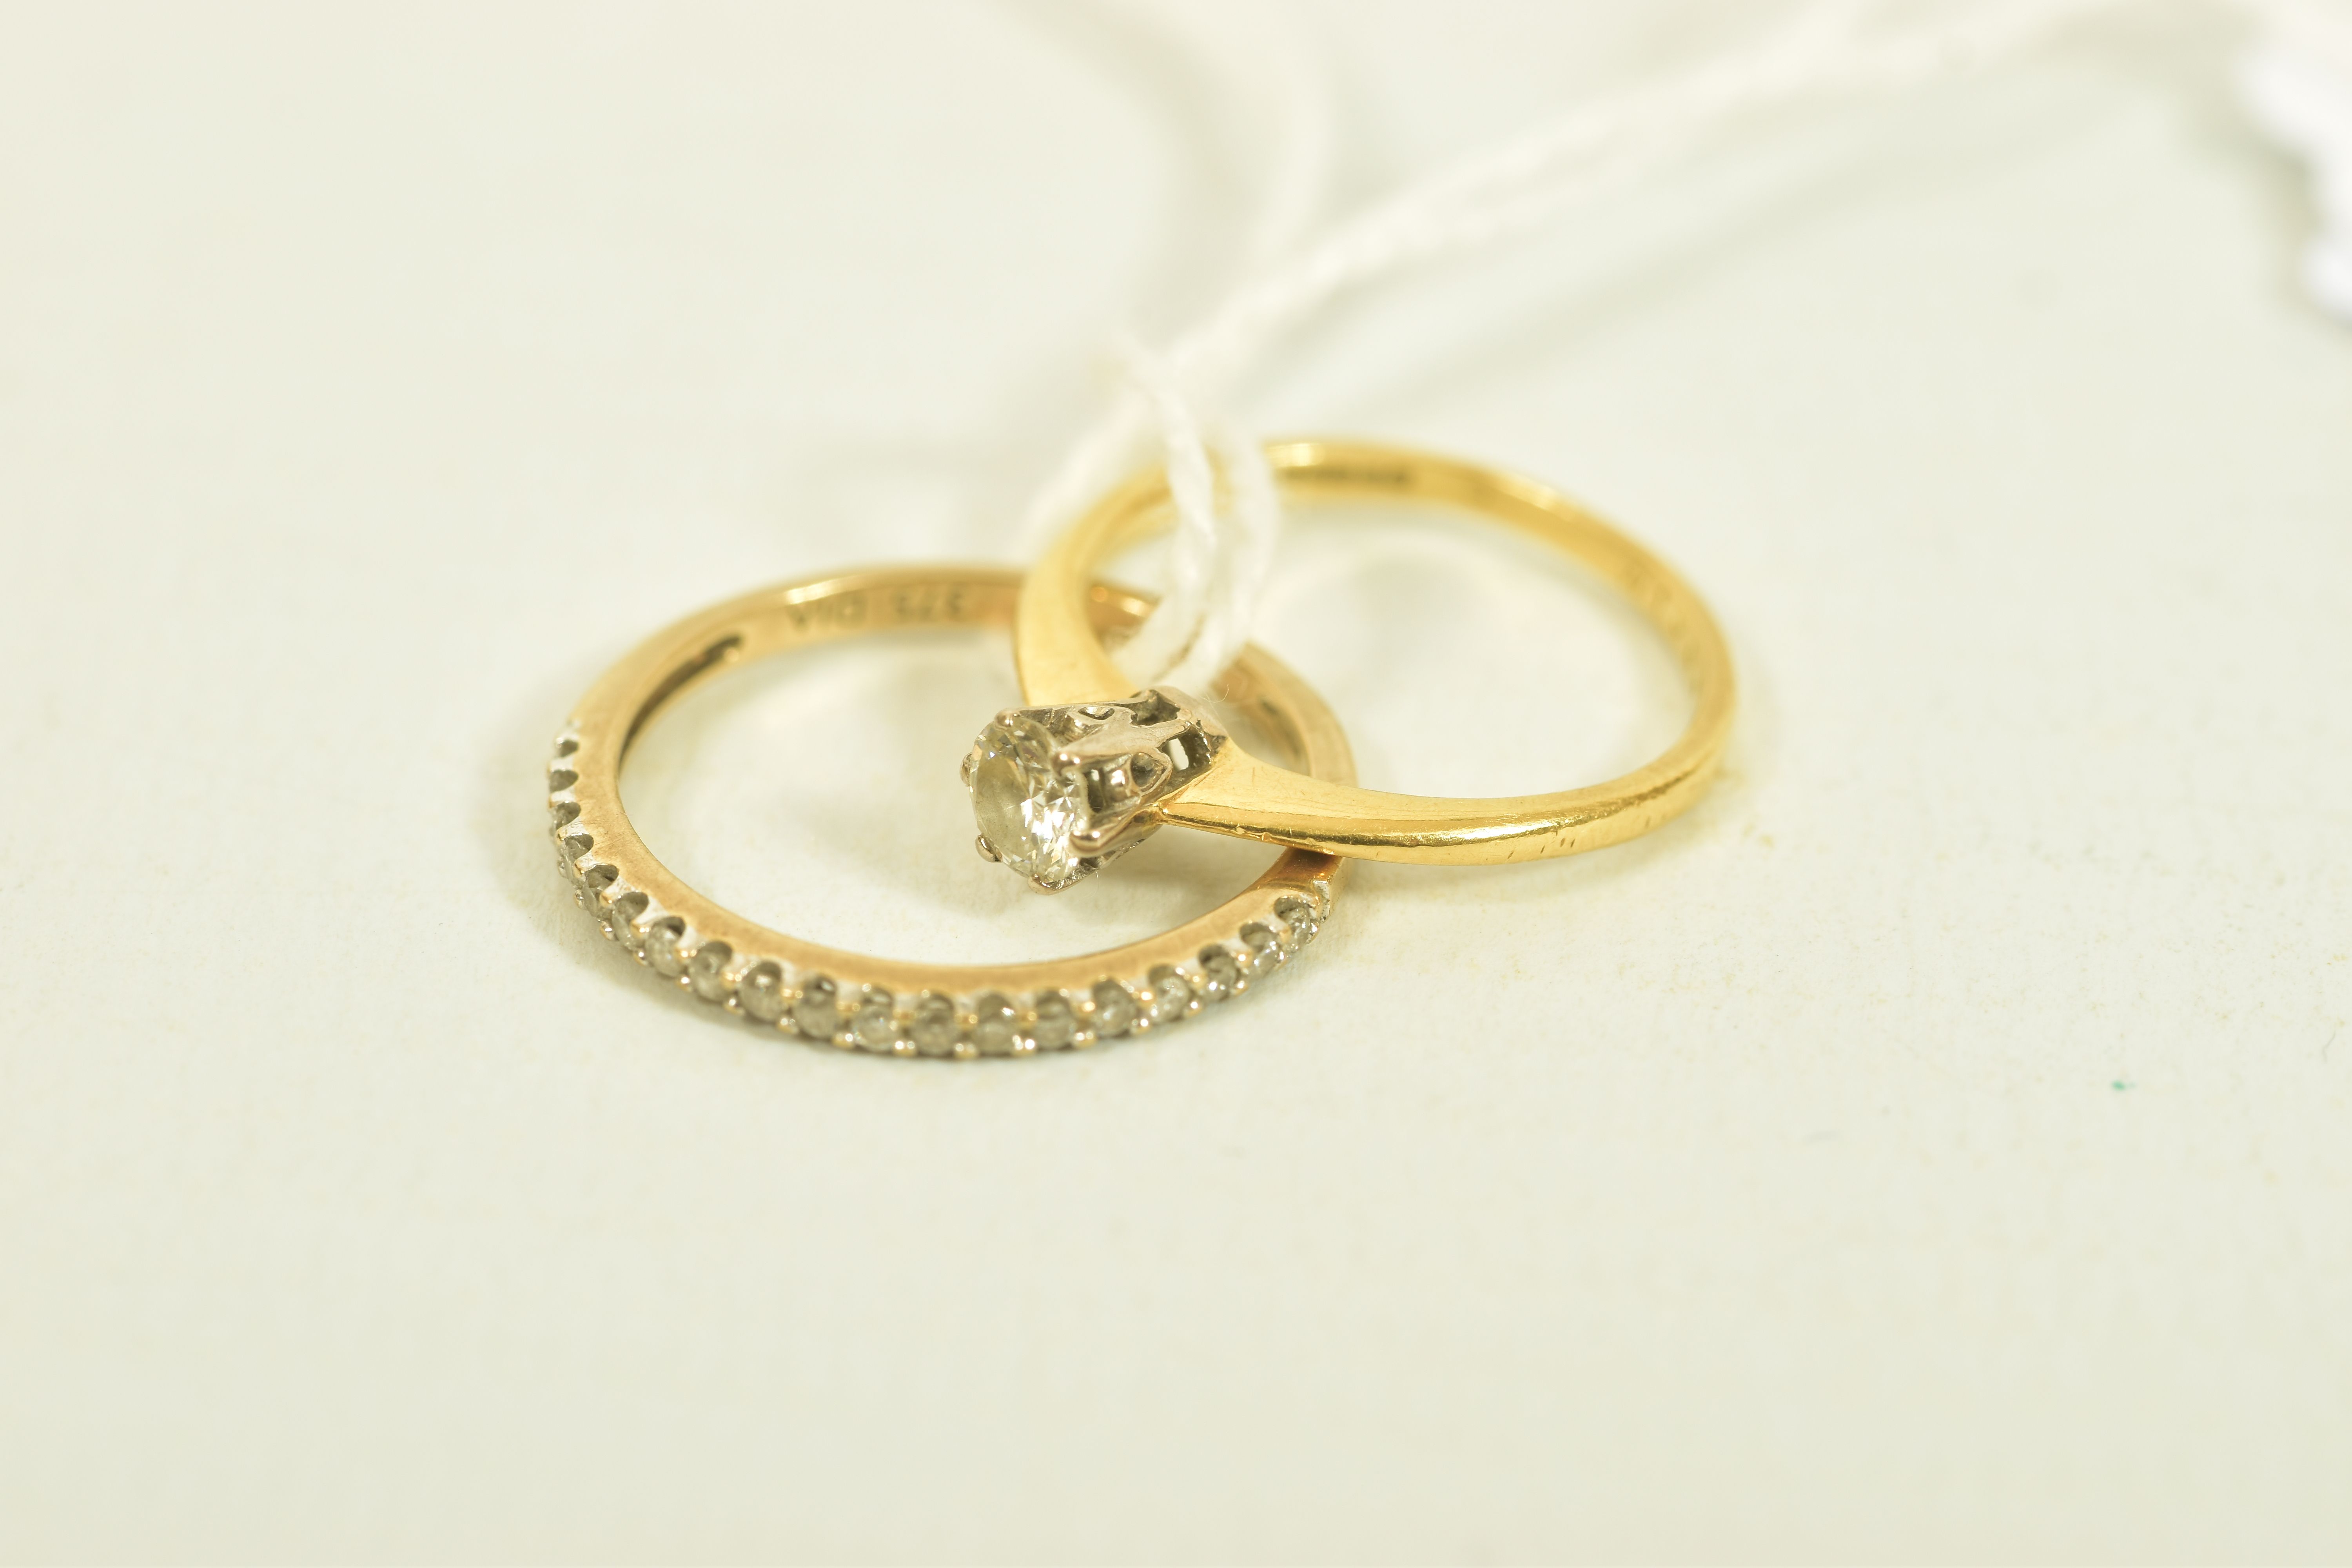 TWO GOLD DIAMOND RINGS, the first an 18ct gold brilliant cut diamond single stone ring, estimated